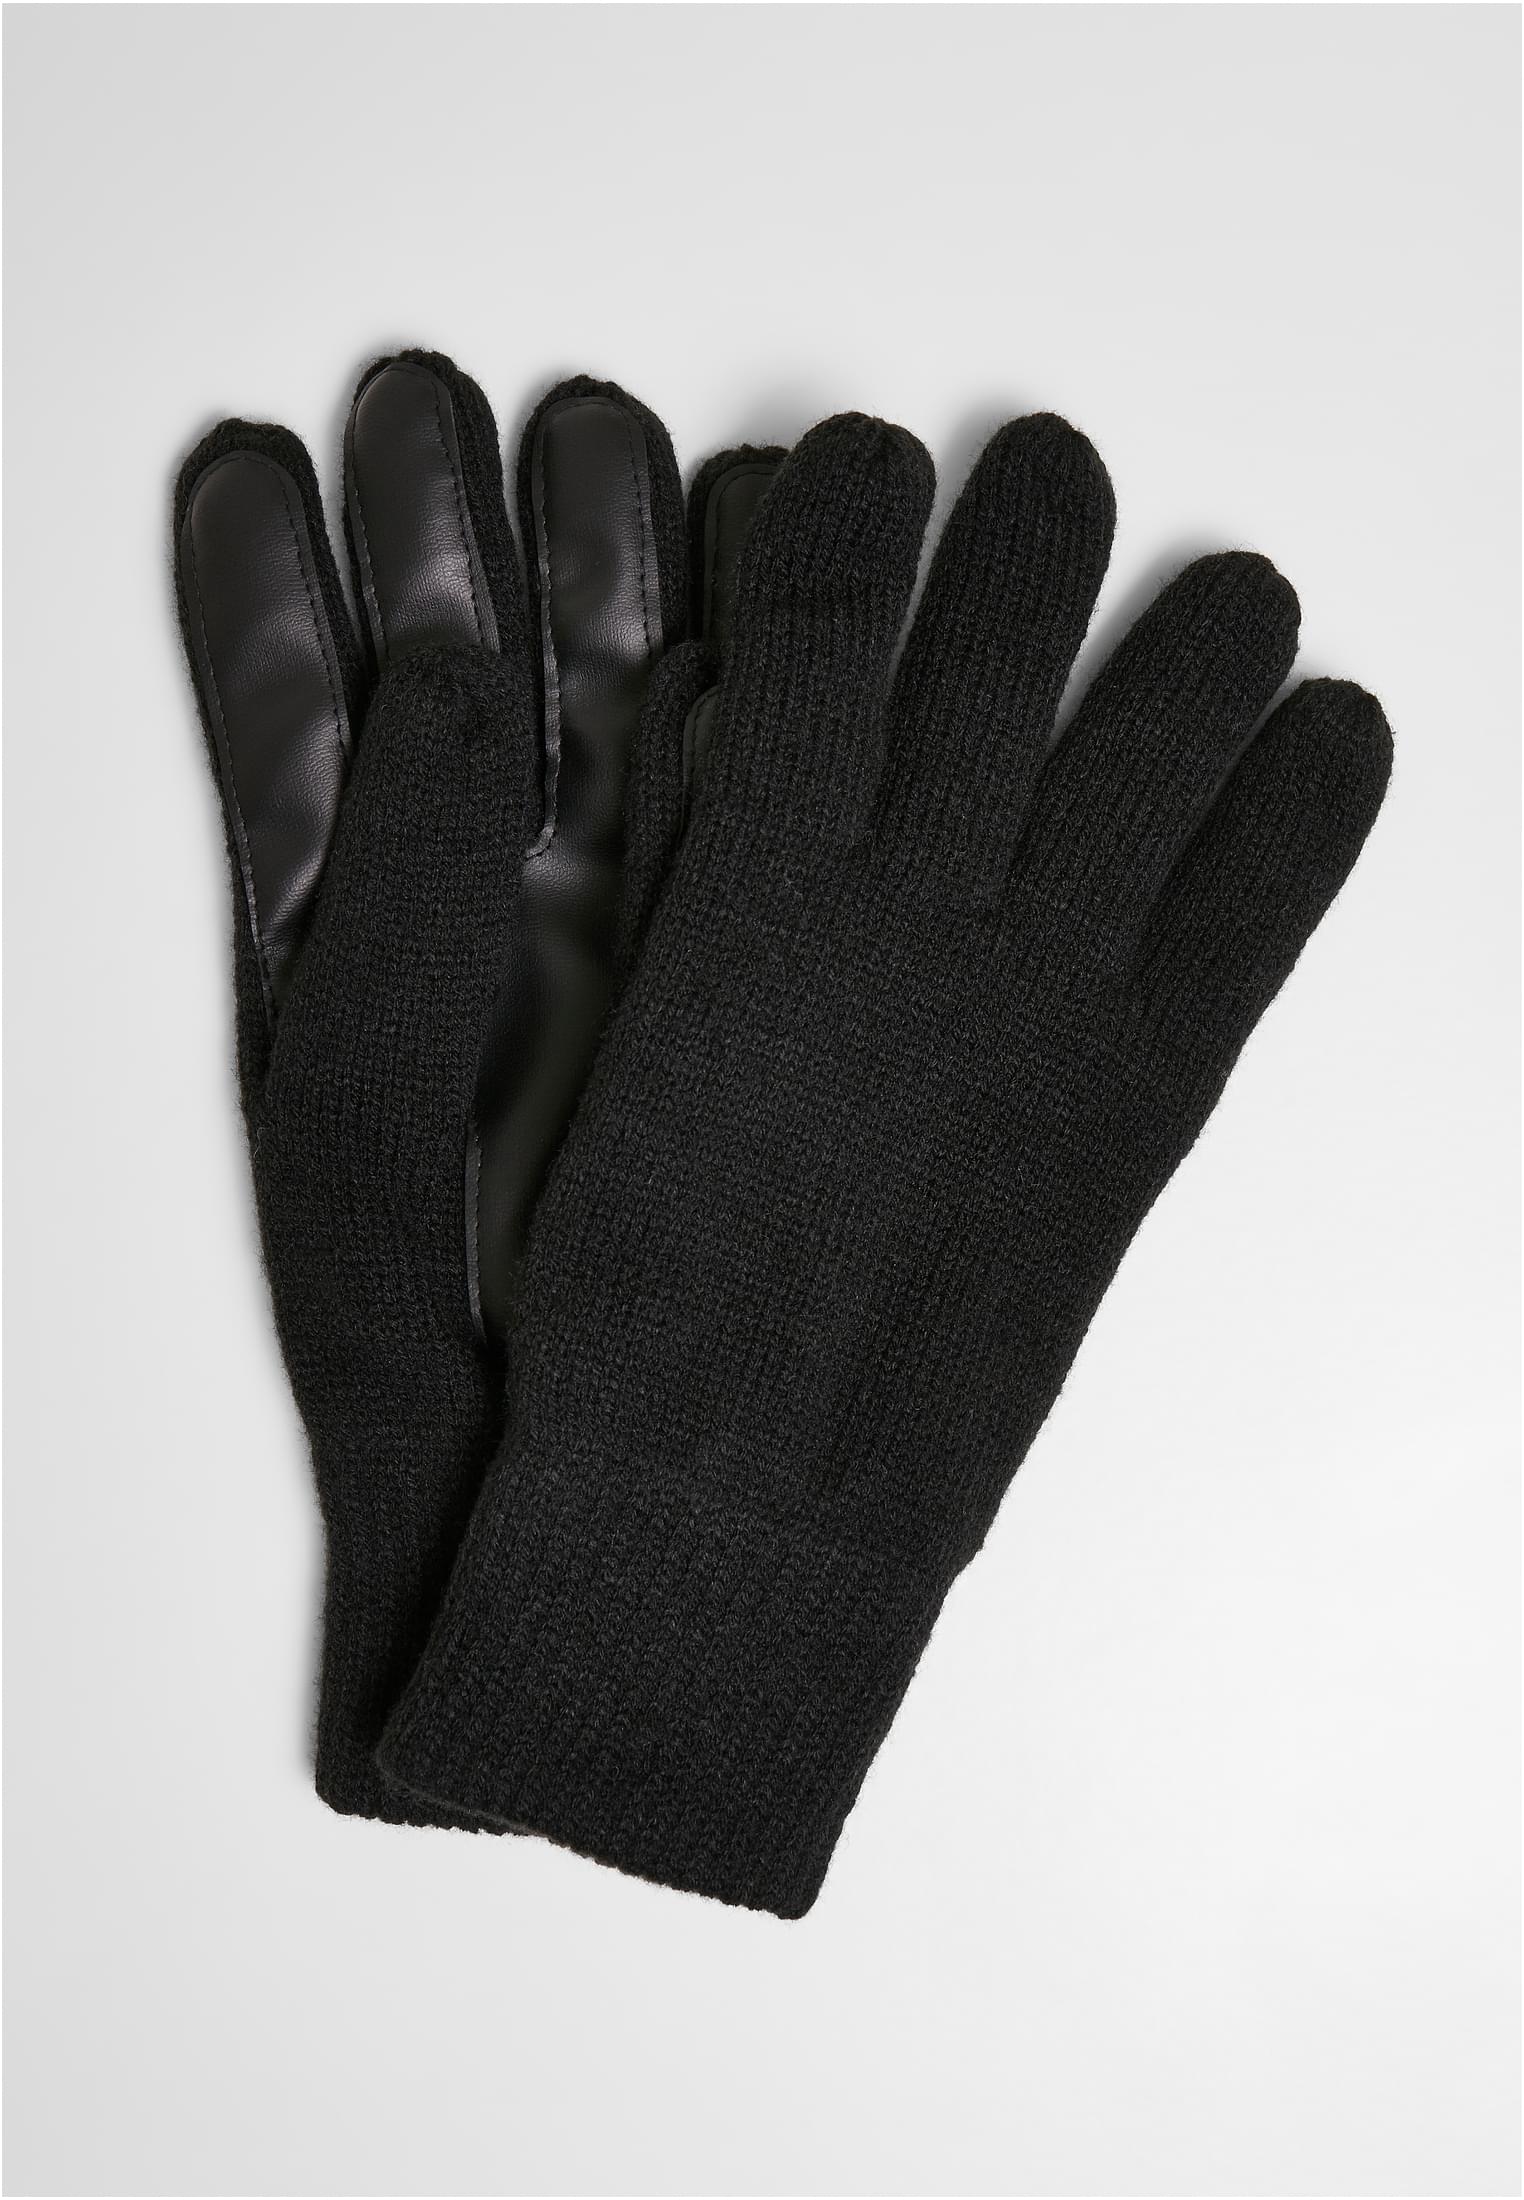 Handschuhe & Schals Synthetic Leather Knit Gloves in Farbe black